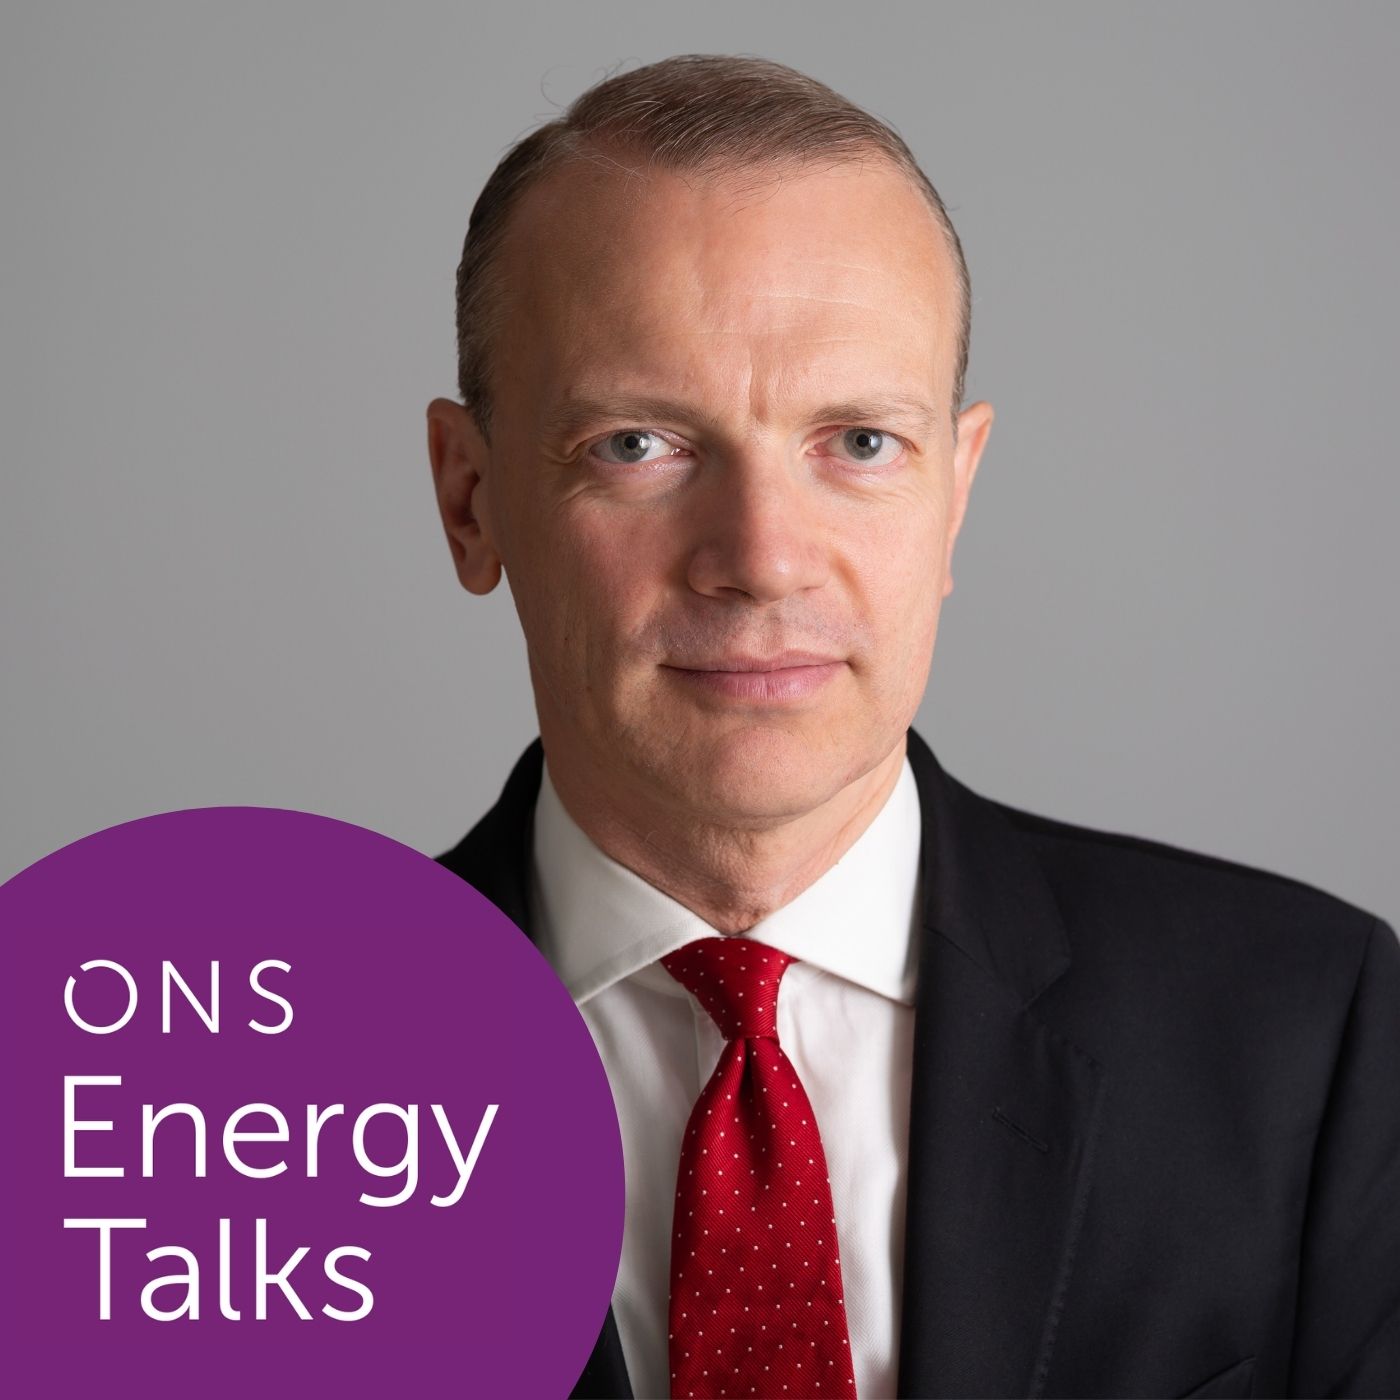 Opportunities in offshore wind. Energy Talk with Giles Dickson